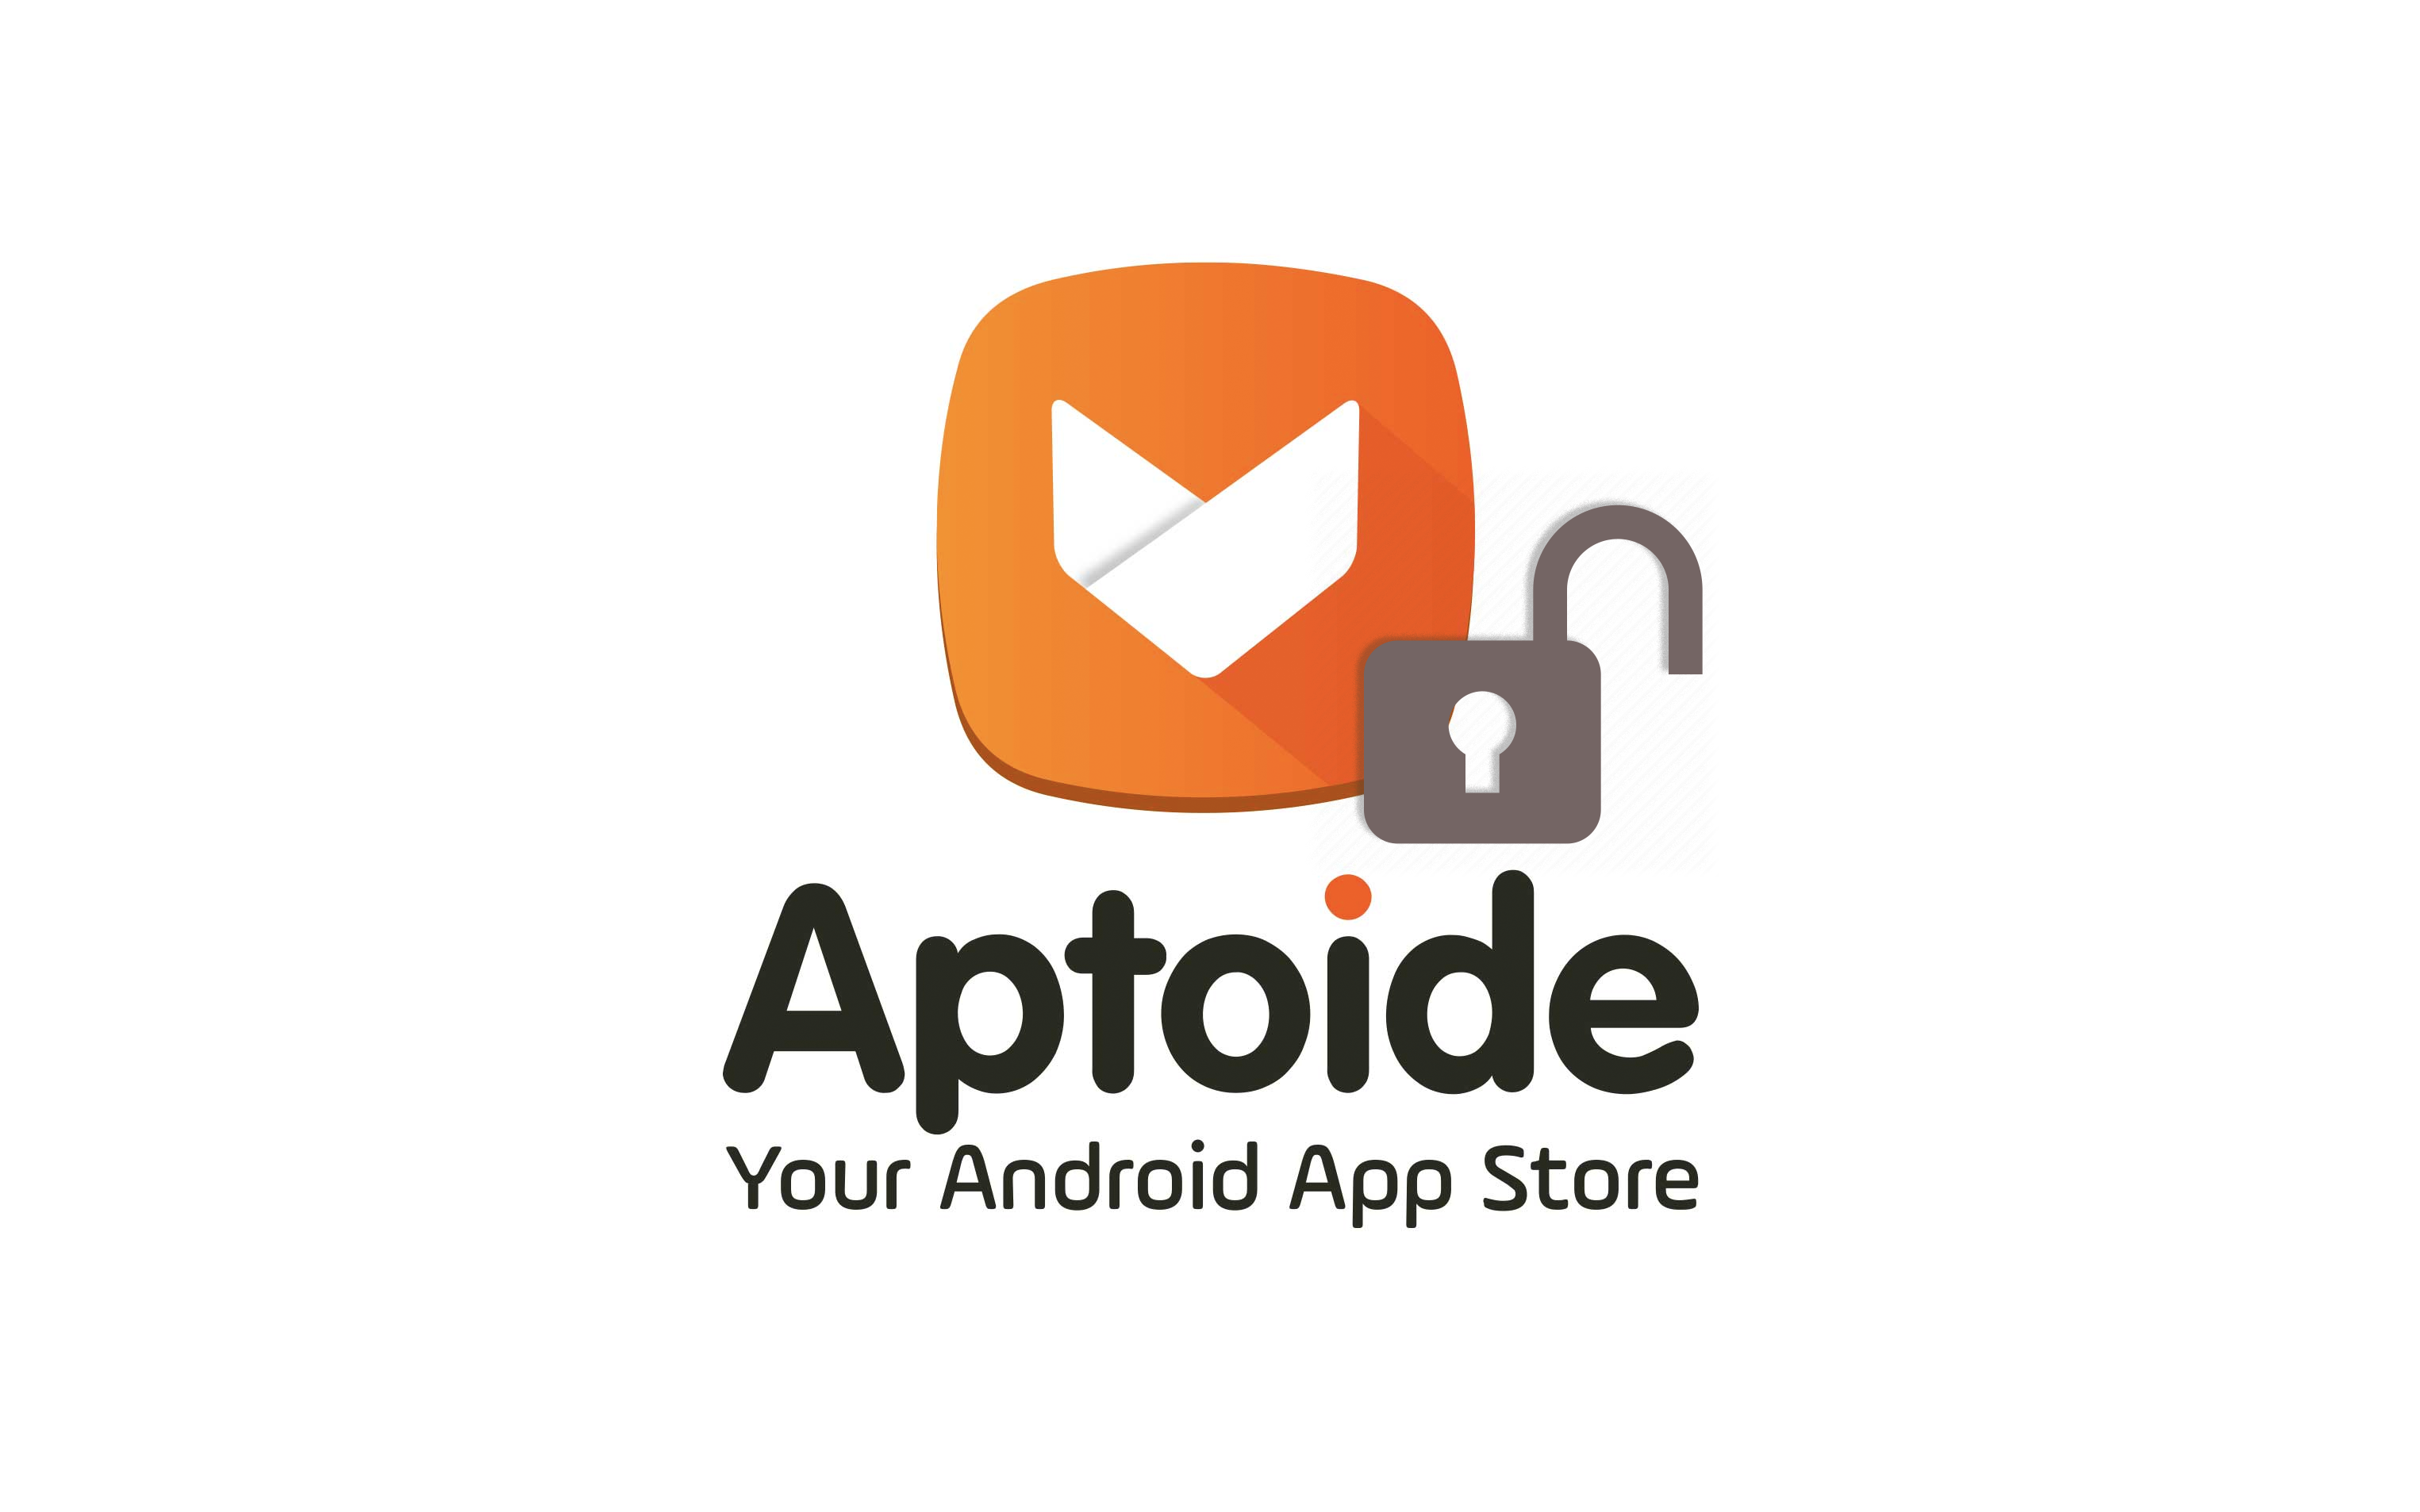 You are currently viewing 知名 Android 应用商店 Aptoide 资料外泄， 预计上千万个帐户受波及